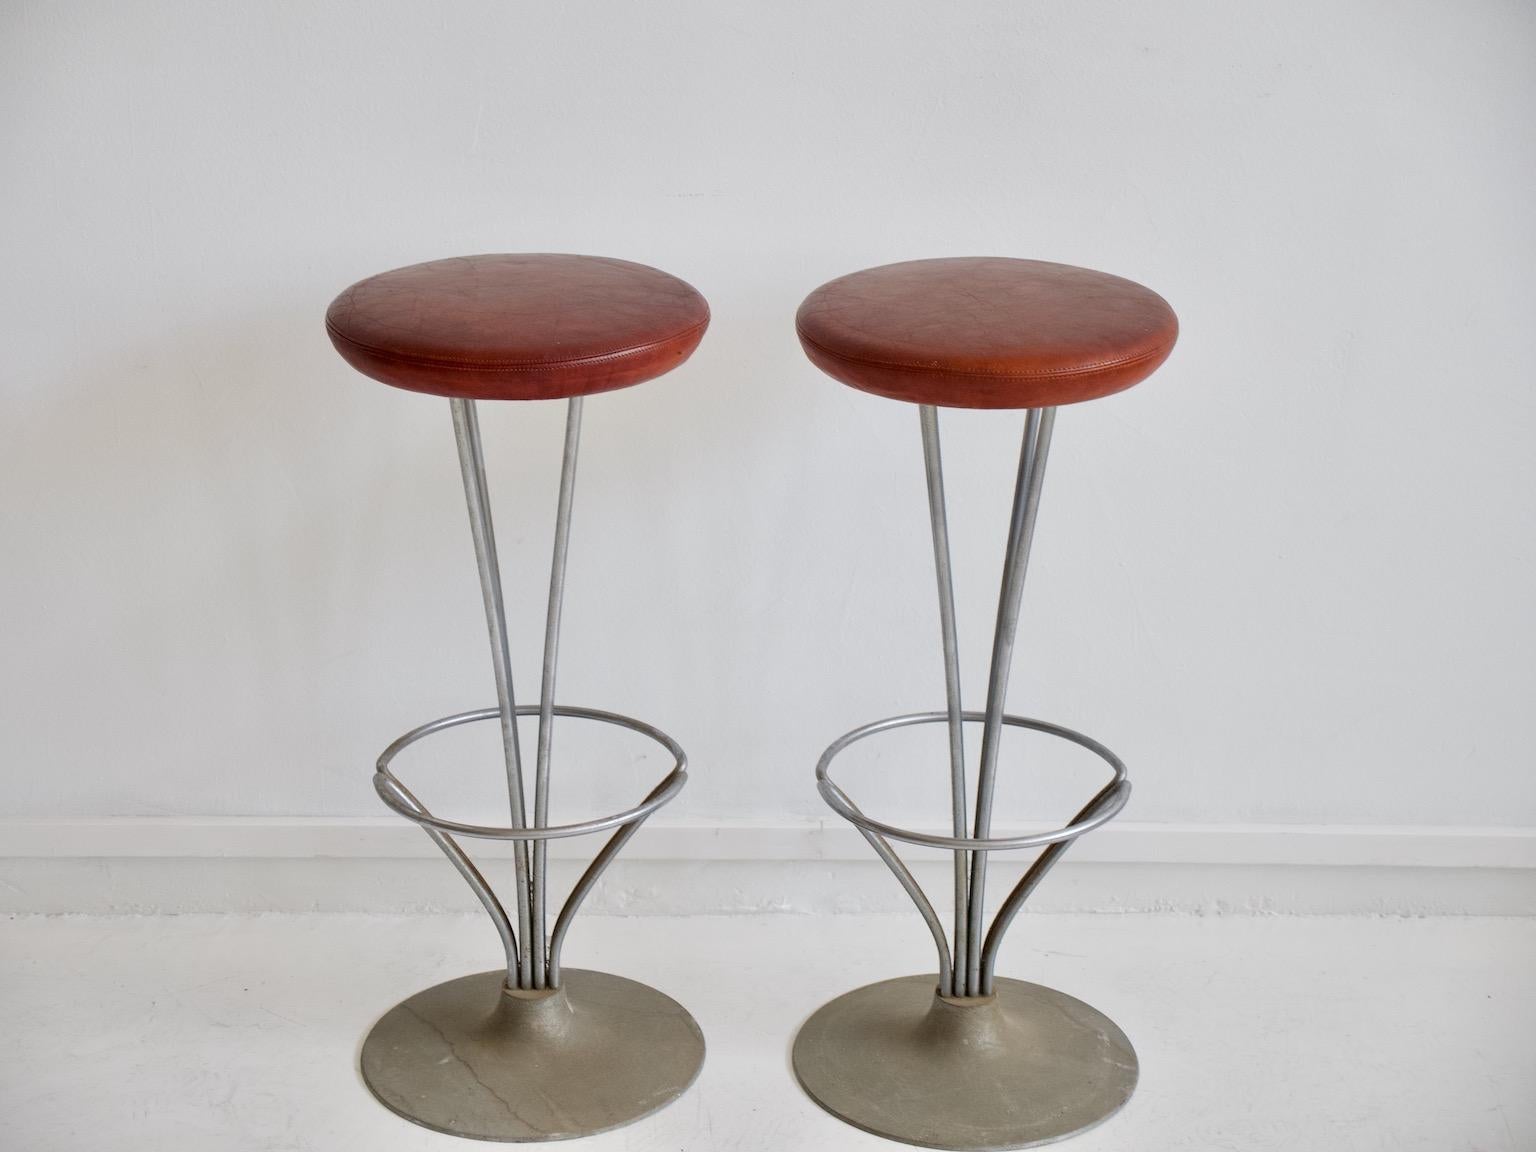 Pair of high bar/kitchen stools with chrome-plated metal frame, mounted on round aluminum foot, seat originally upholstered in cognac-colored leather. Designed in 1961 by Piet Hein. Produced by Fritz Hansen.
Literature: Noritsugu Oda. Danish